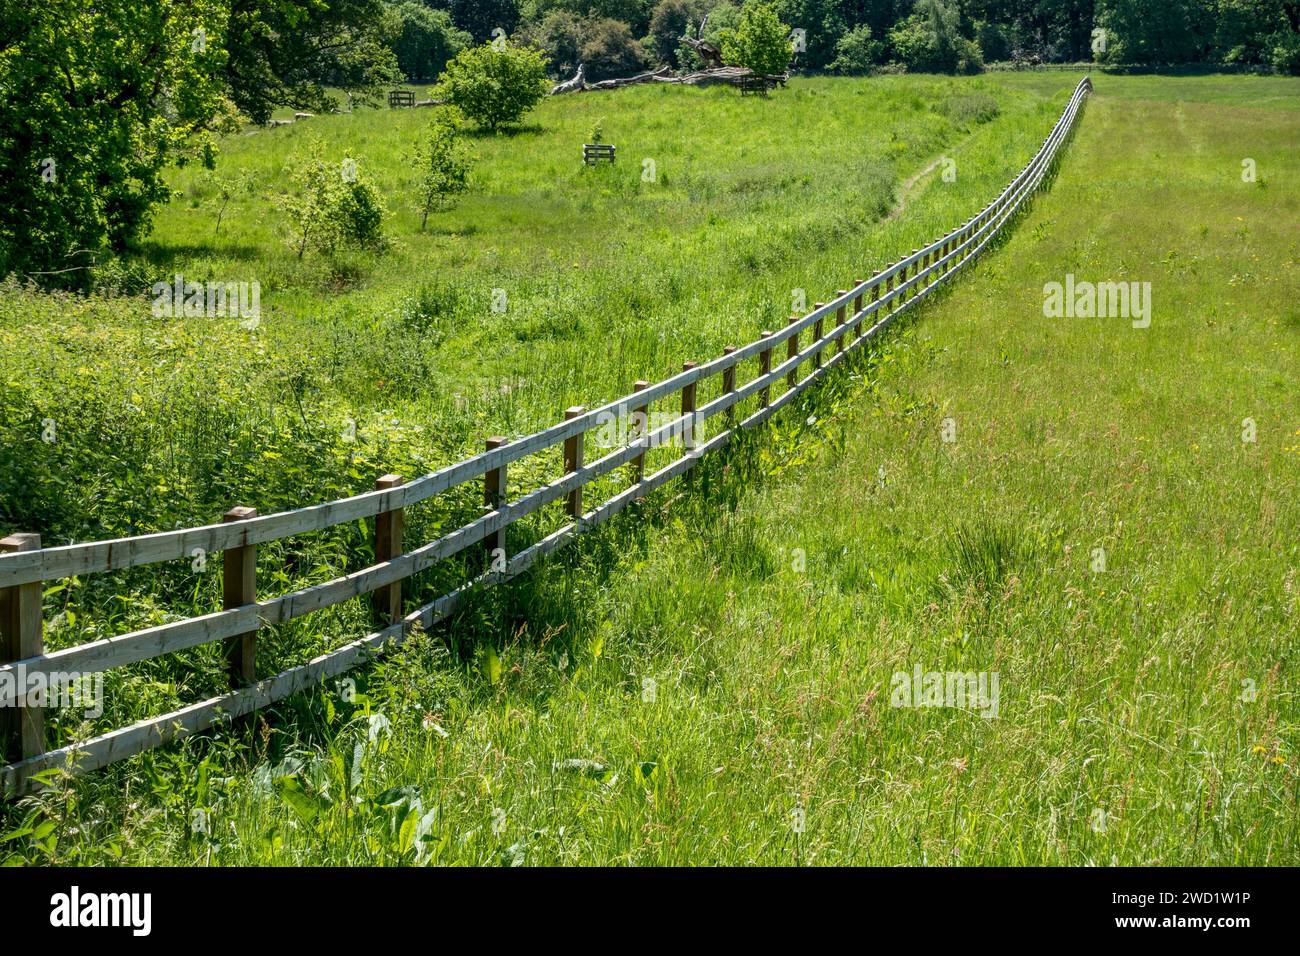 Long, straight, wooden post and rail fence across field of green grass with woodland trees beyond, Derbyshire, England, UK Stock Photo